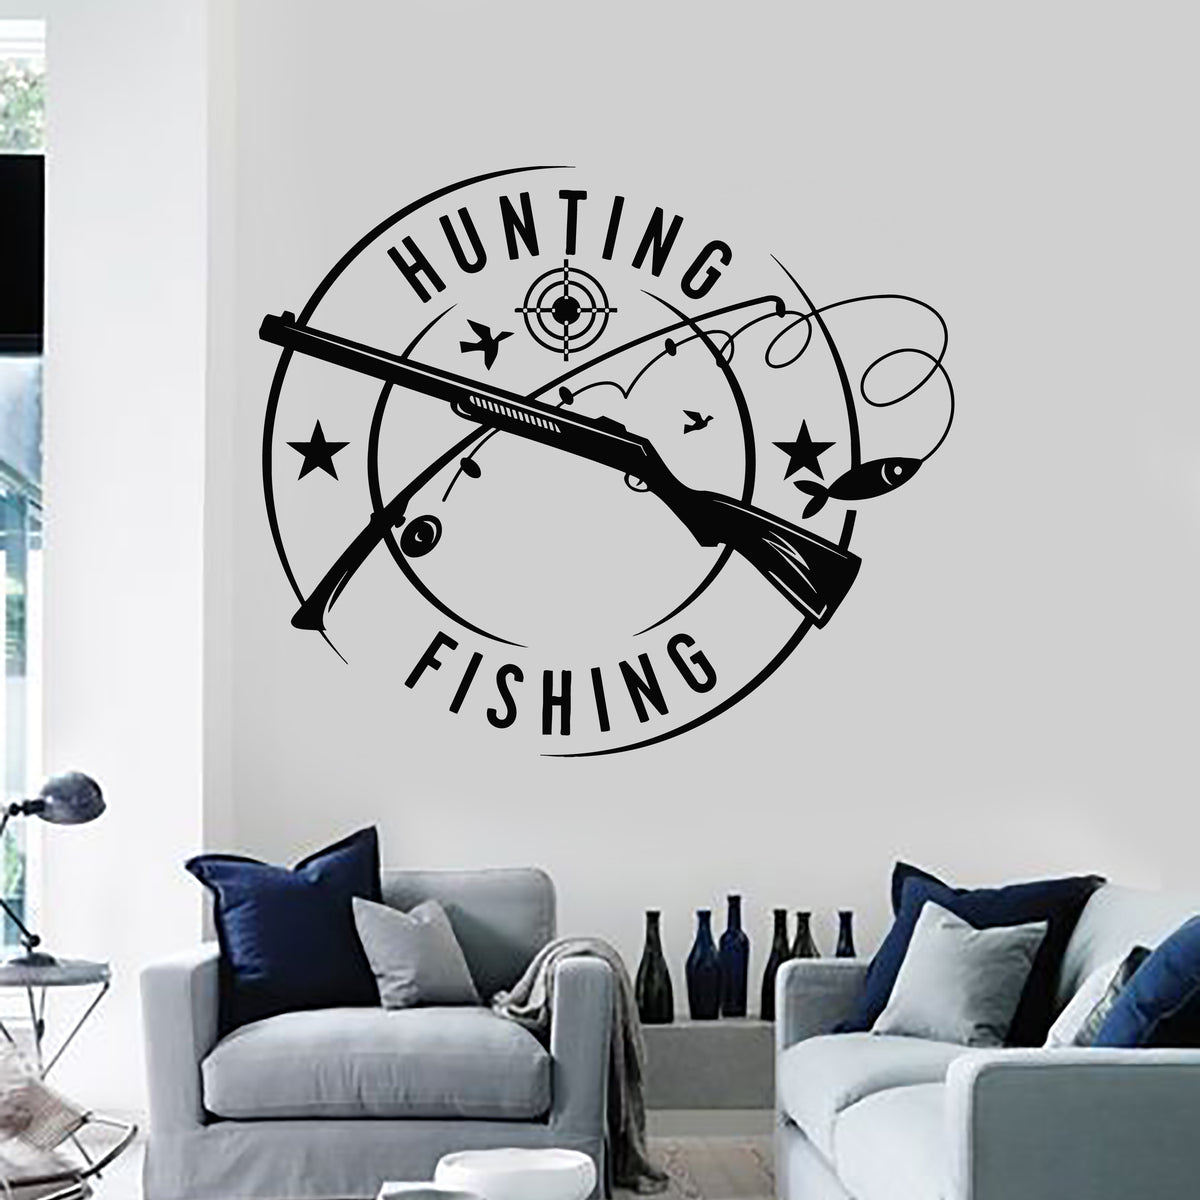 Vinyl Wall Decal Fish Hobby Fishing Pole Hunting Store Decor Stickers —  Wallstickers4you